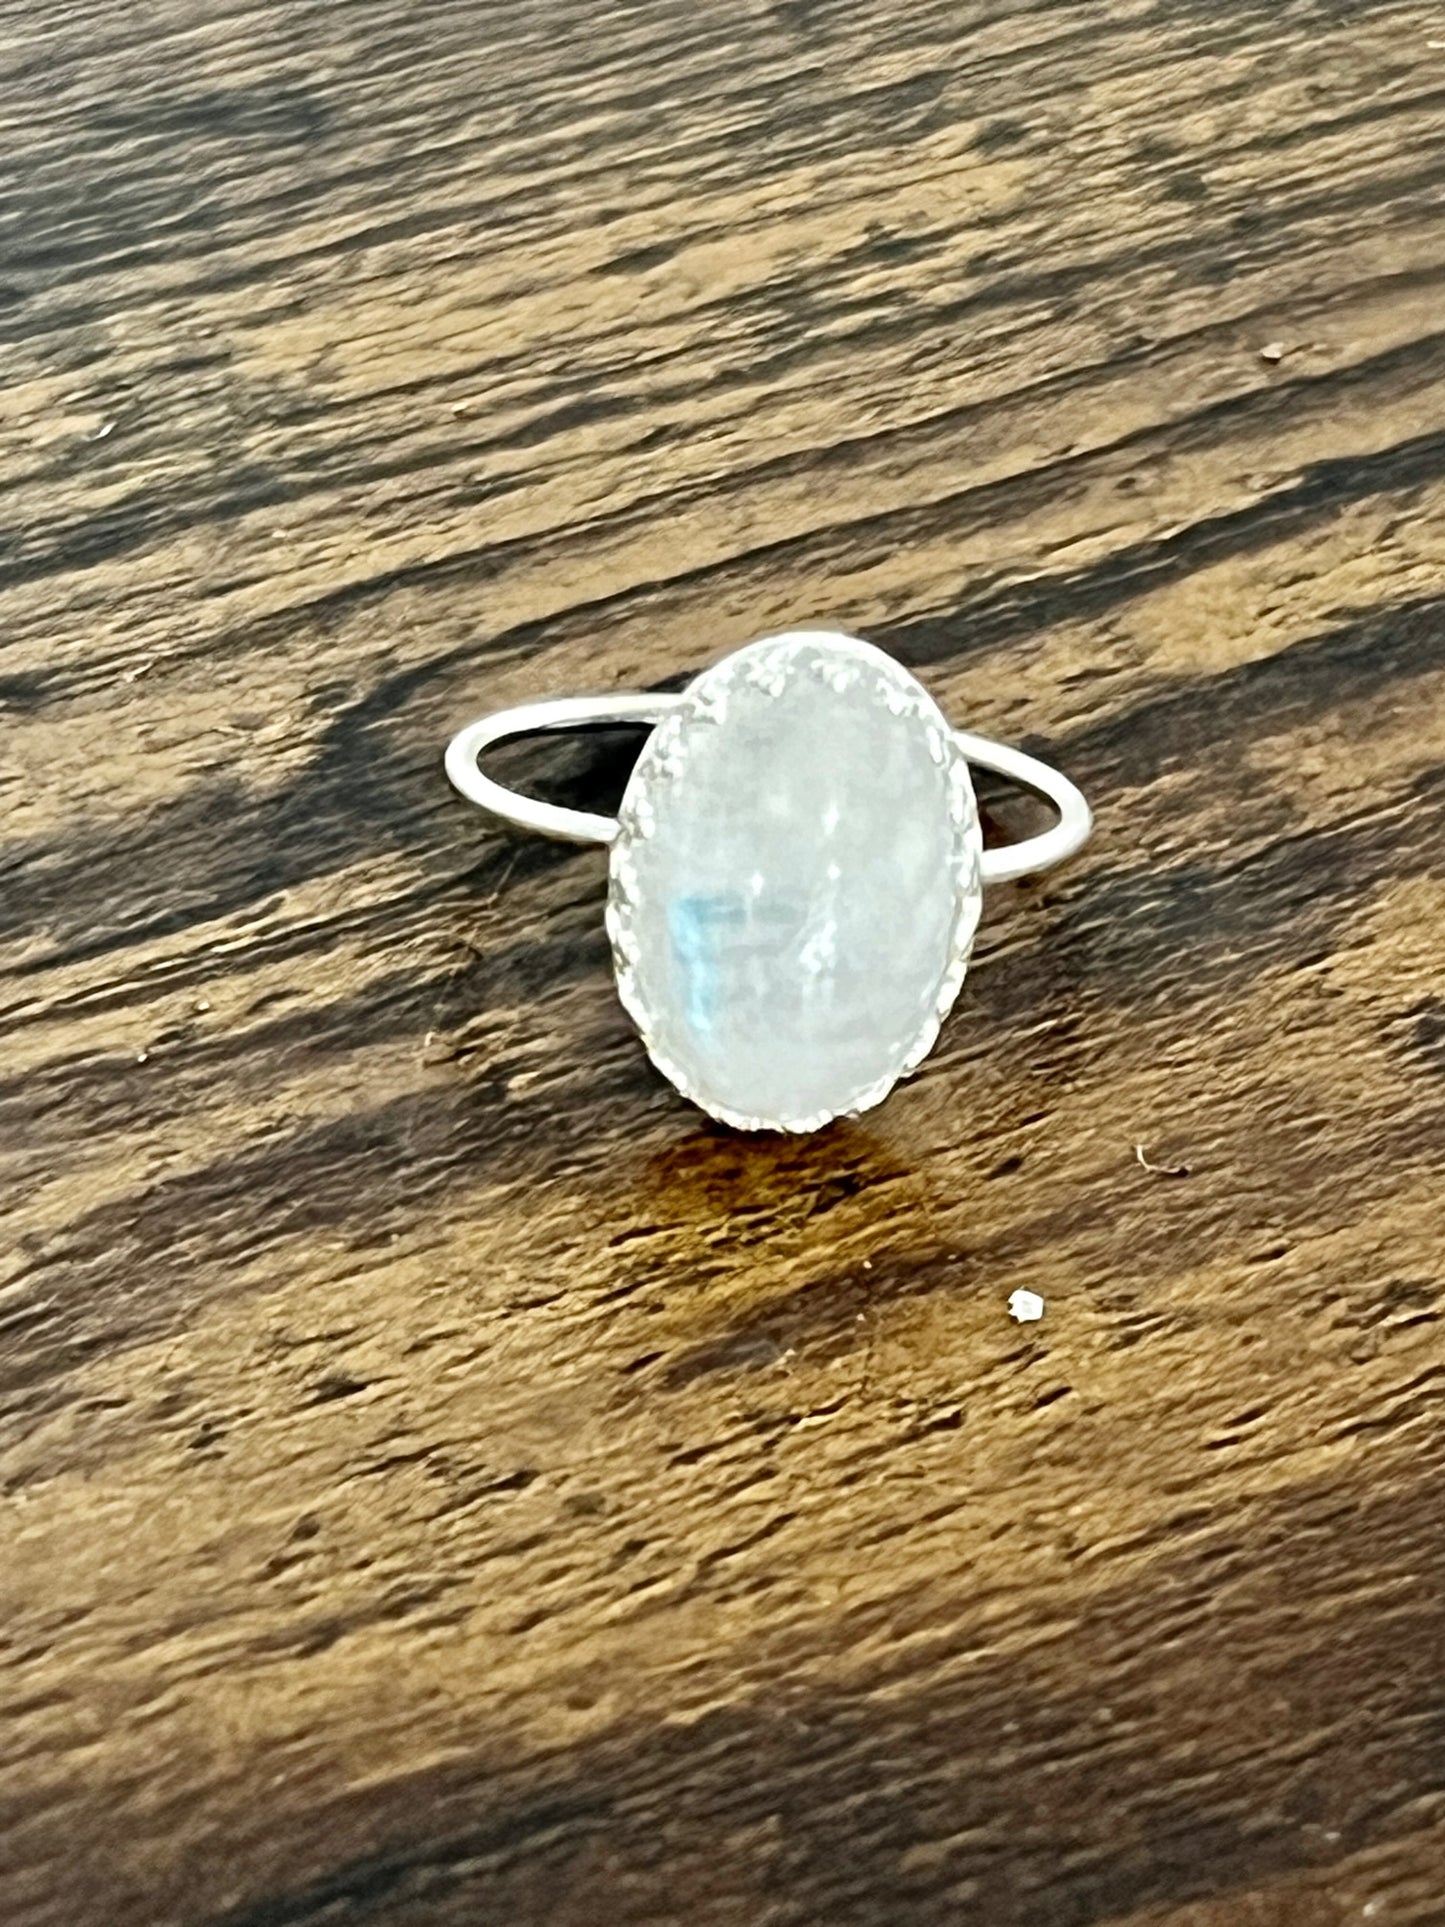 Session to Make a Simple Ring